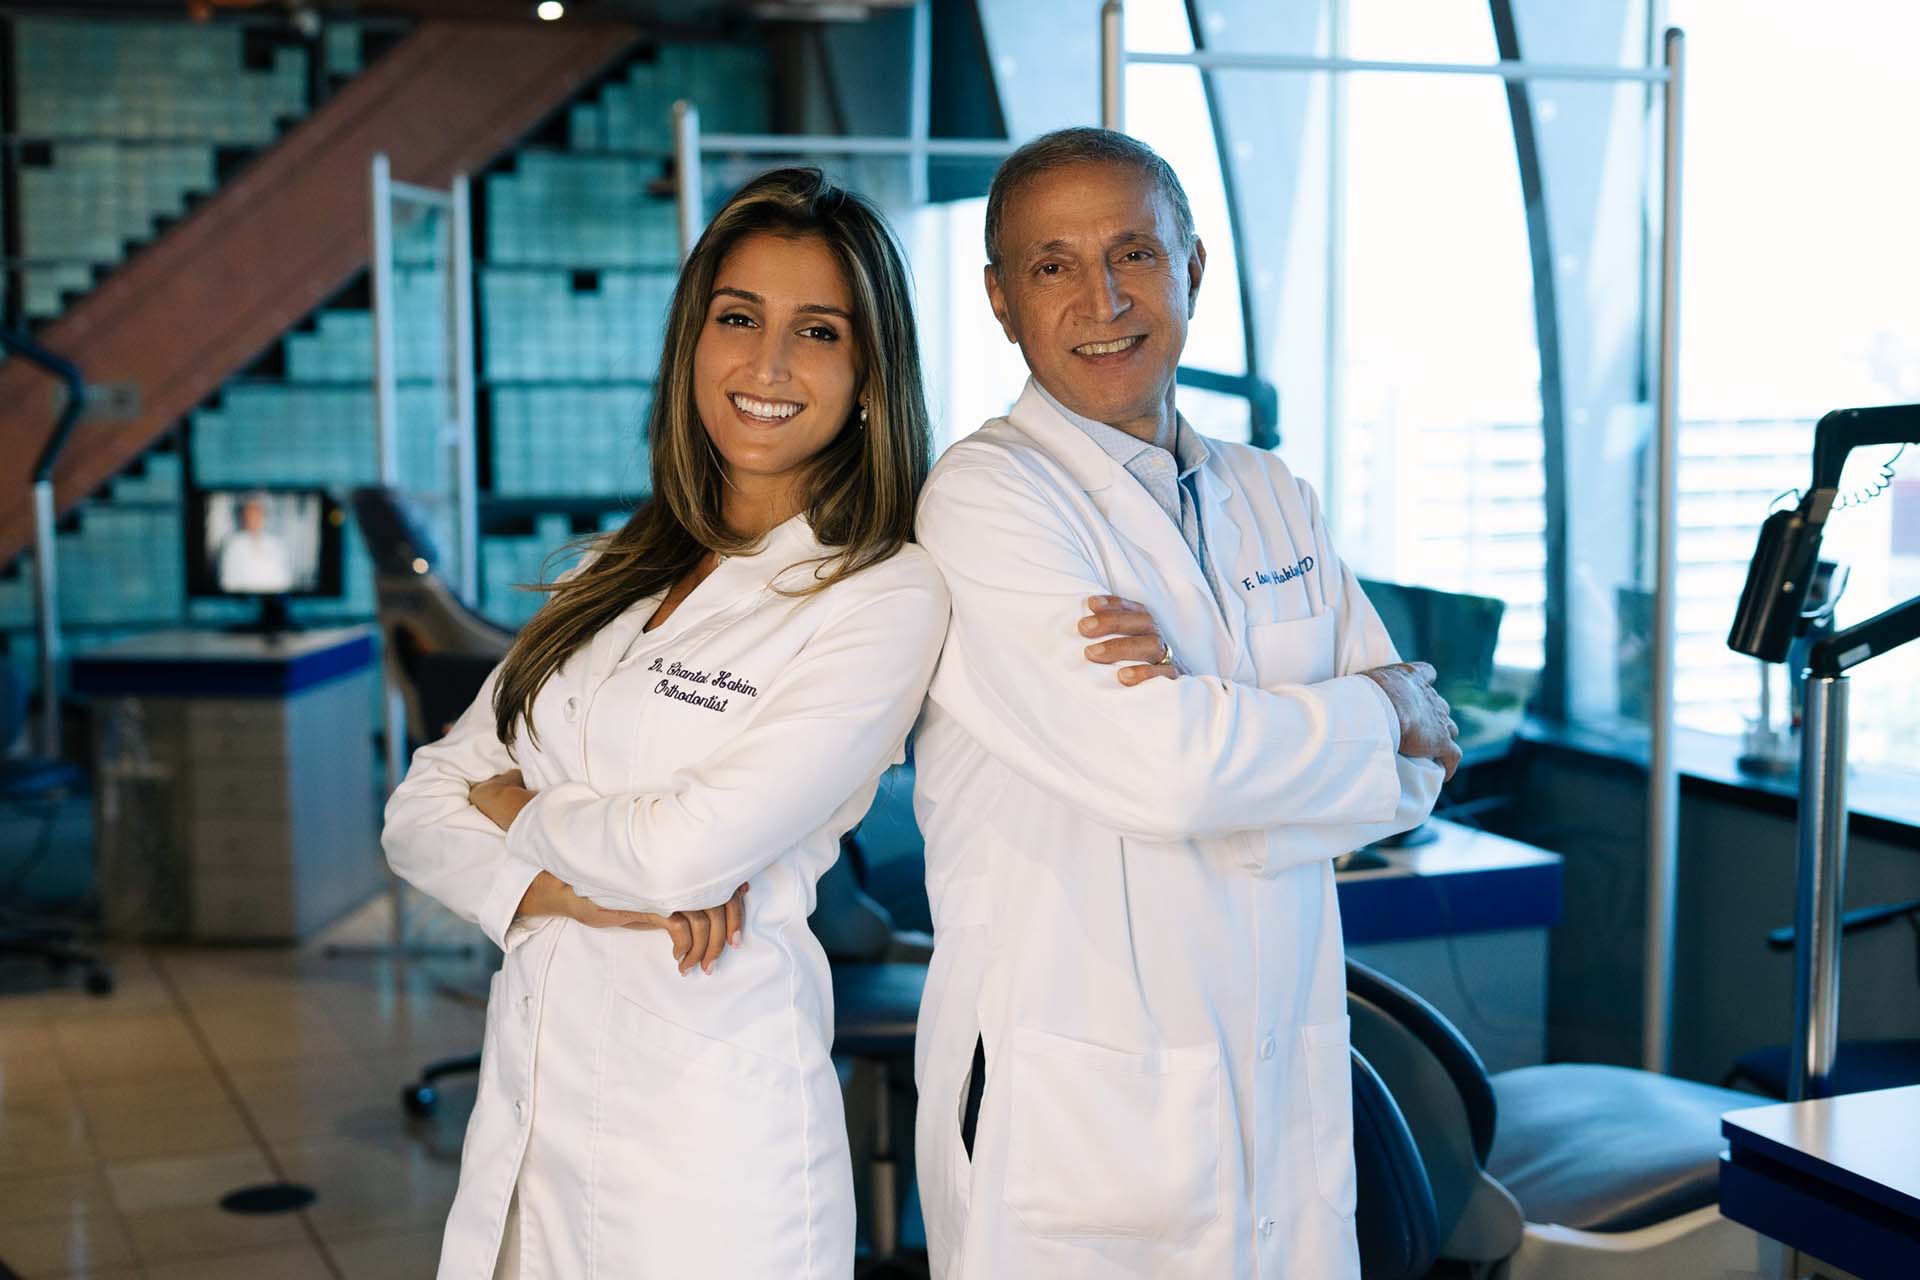 Dr. Chantal Hakim and Dr. F. Isaac Hakim at the Orthospaceship in Los Angeles, a Southern California orthodontic practice serving Silver Lake, Los Angeles.